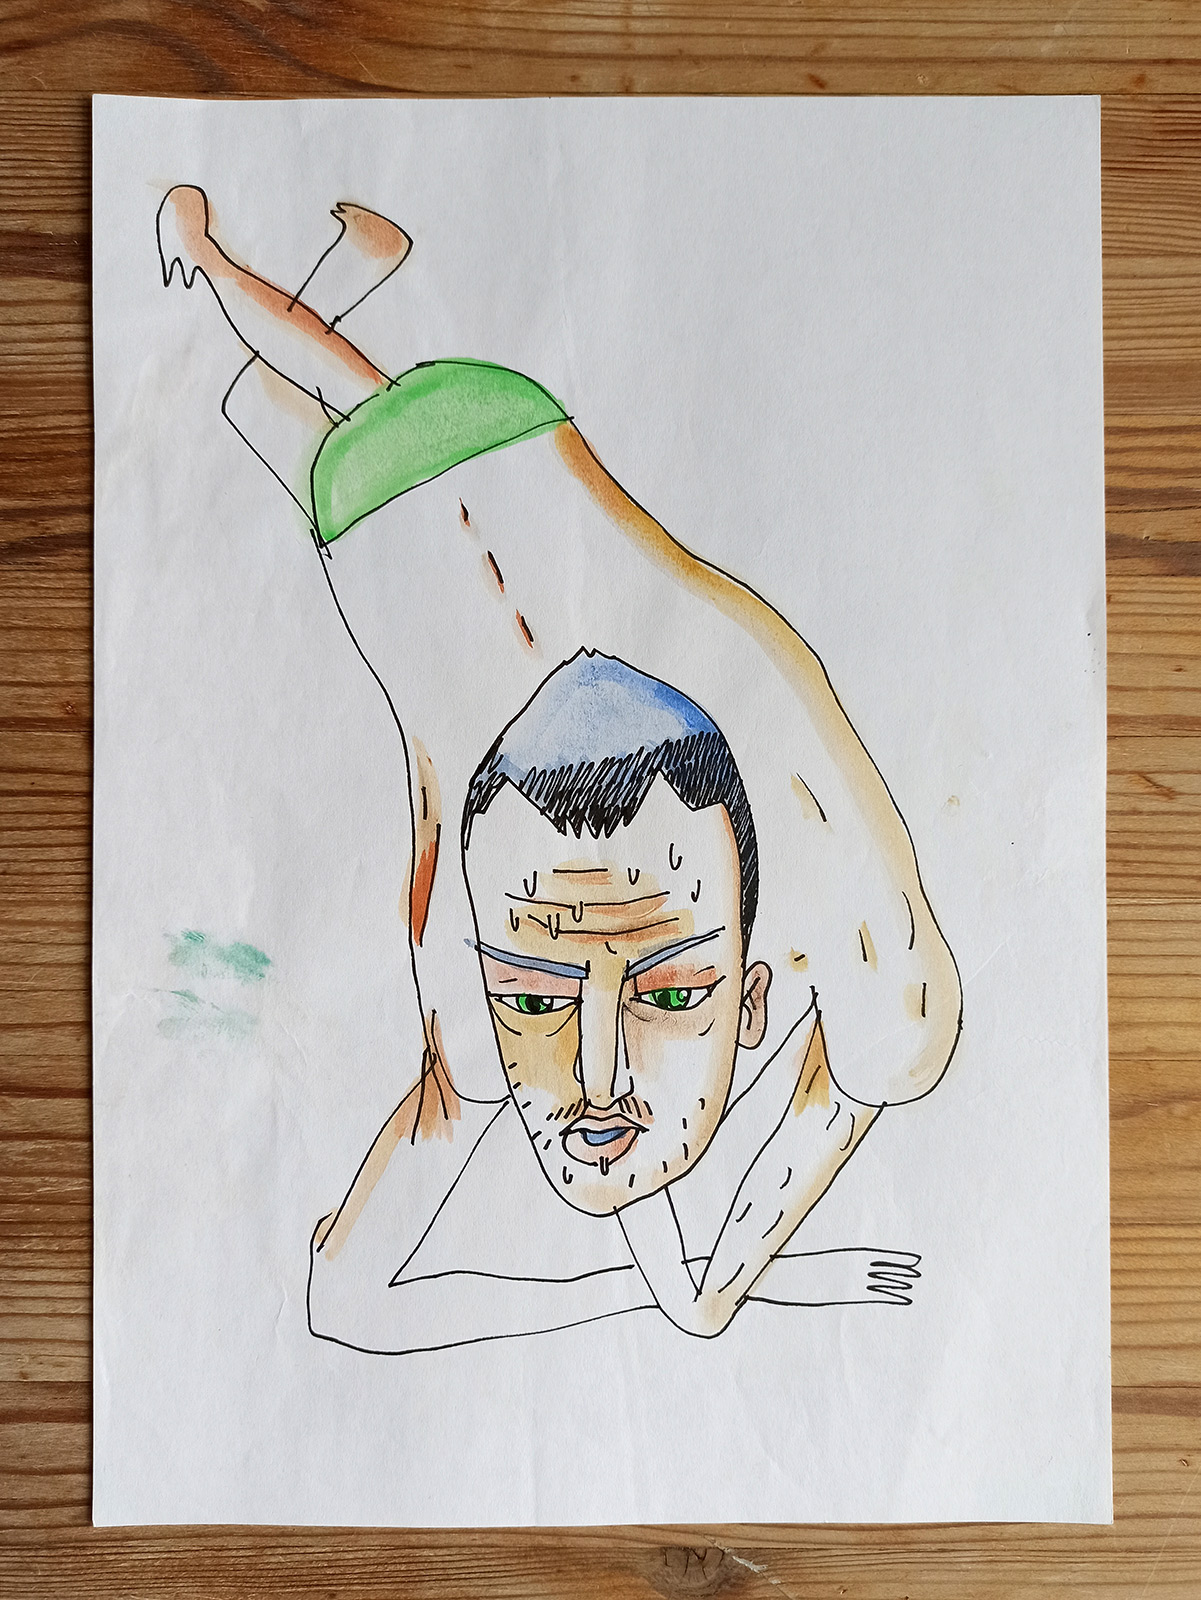 drawings, figurative, illustrative, bodies, everyday life, oceans, people, beige, brown, green, paper, marker, modern, Buy original high quality art. Paintings, drawings, limited edition prints & posters by talented artists.